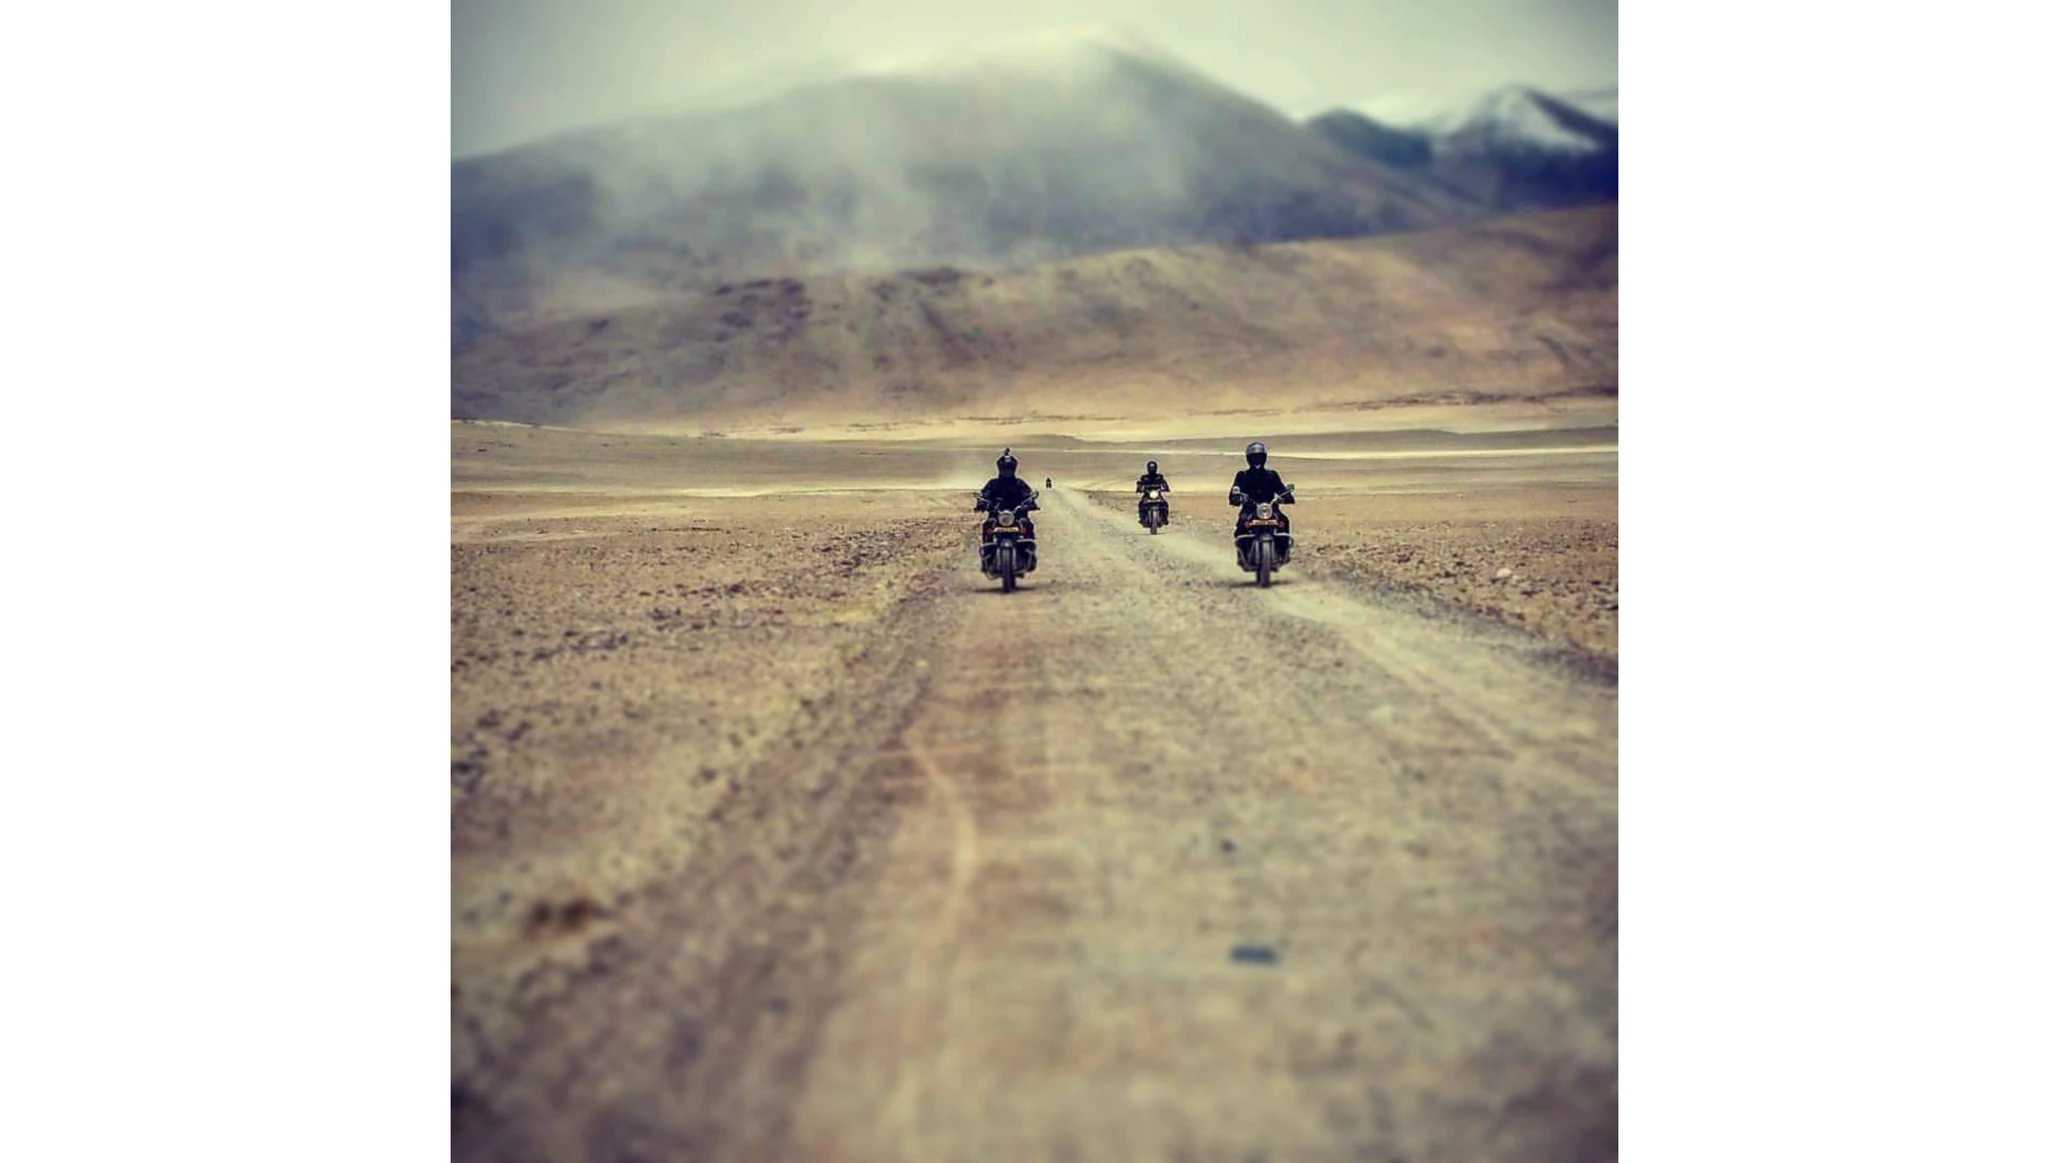 Motorcycle Escapades: Guiding travellers through most exotic destinations